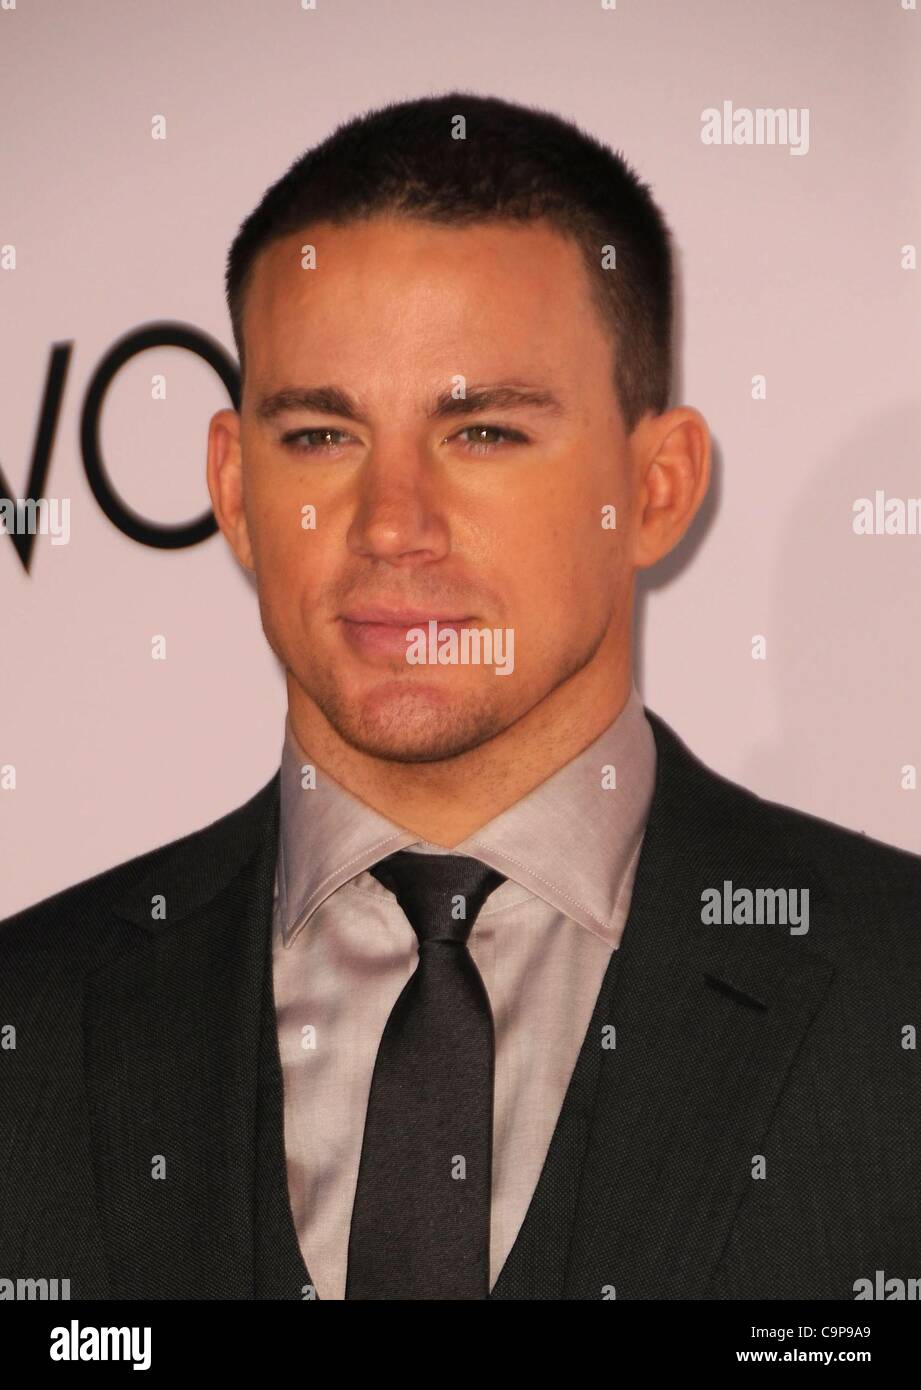 Channing Tatum at arrivals for THE VOW Premiere, Grauman's Chinese Theatre, Los Angeles, CA February 6, 2012. Photo By: Dee Cercone/Everett Collection Stock Photo